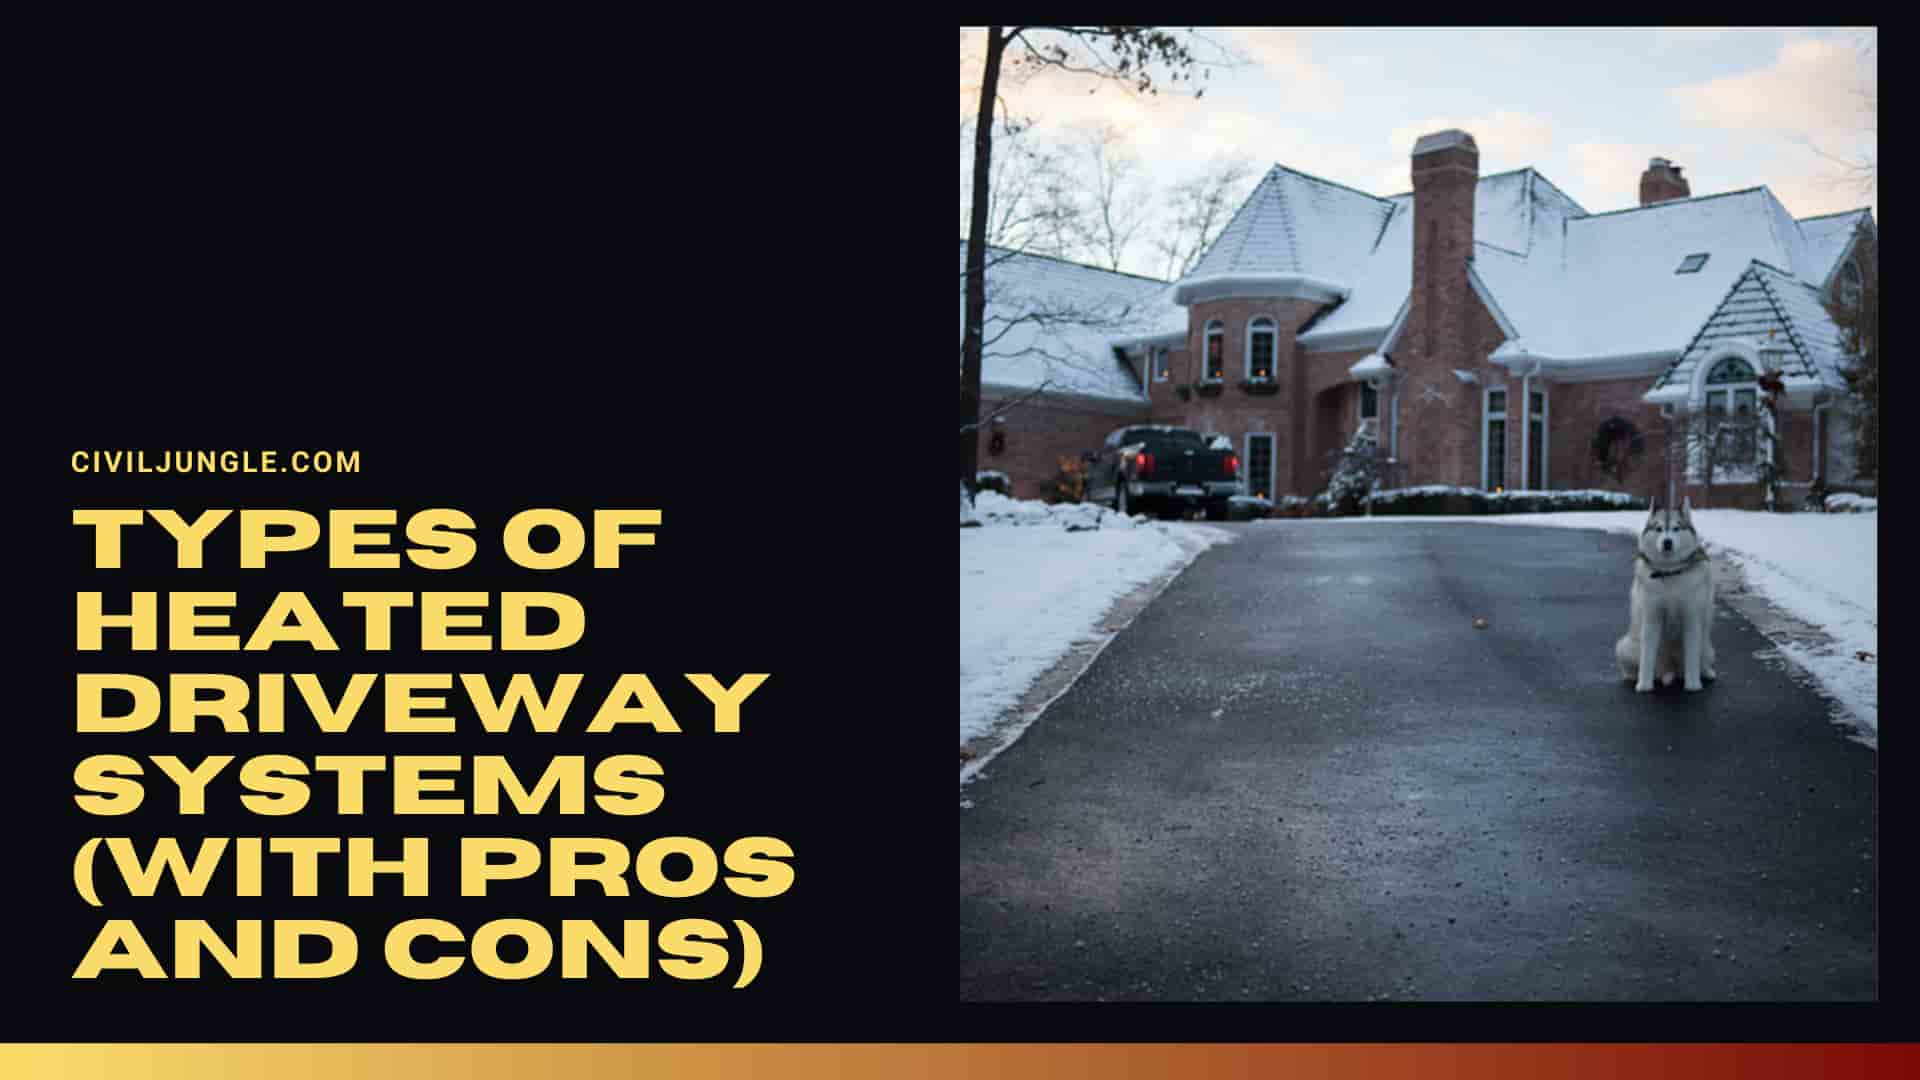 Types of Heated Driveway Systems (With Pros and Cons)